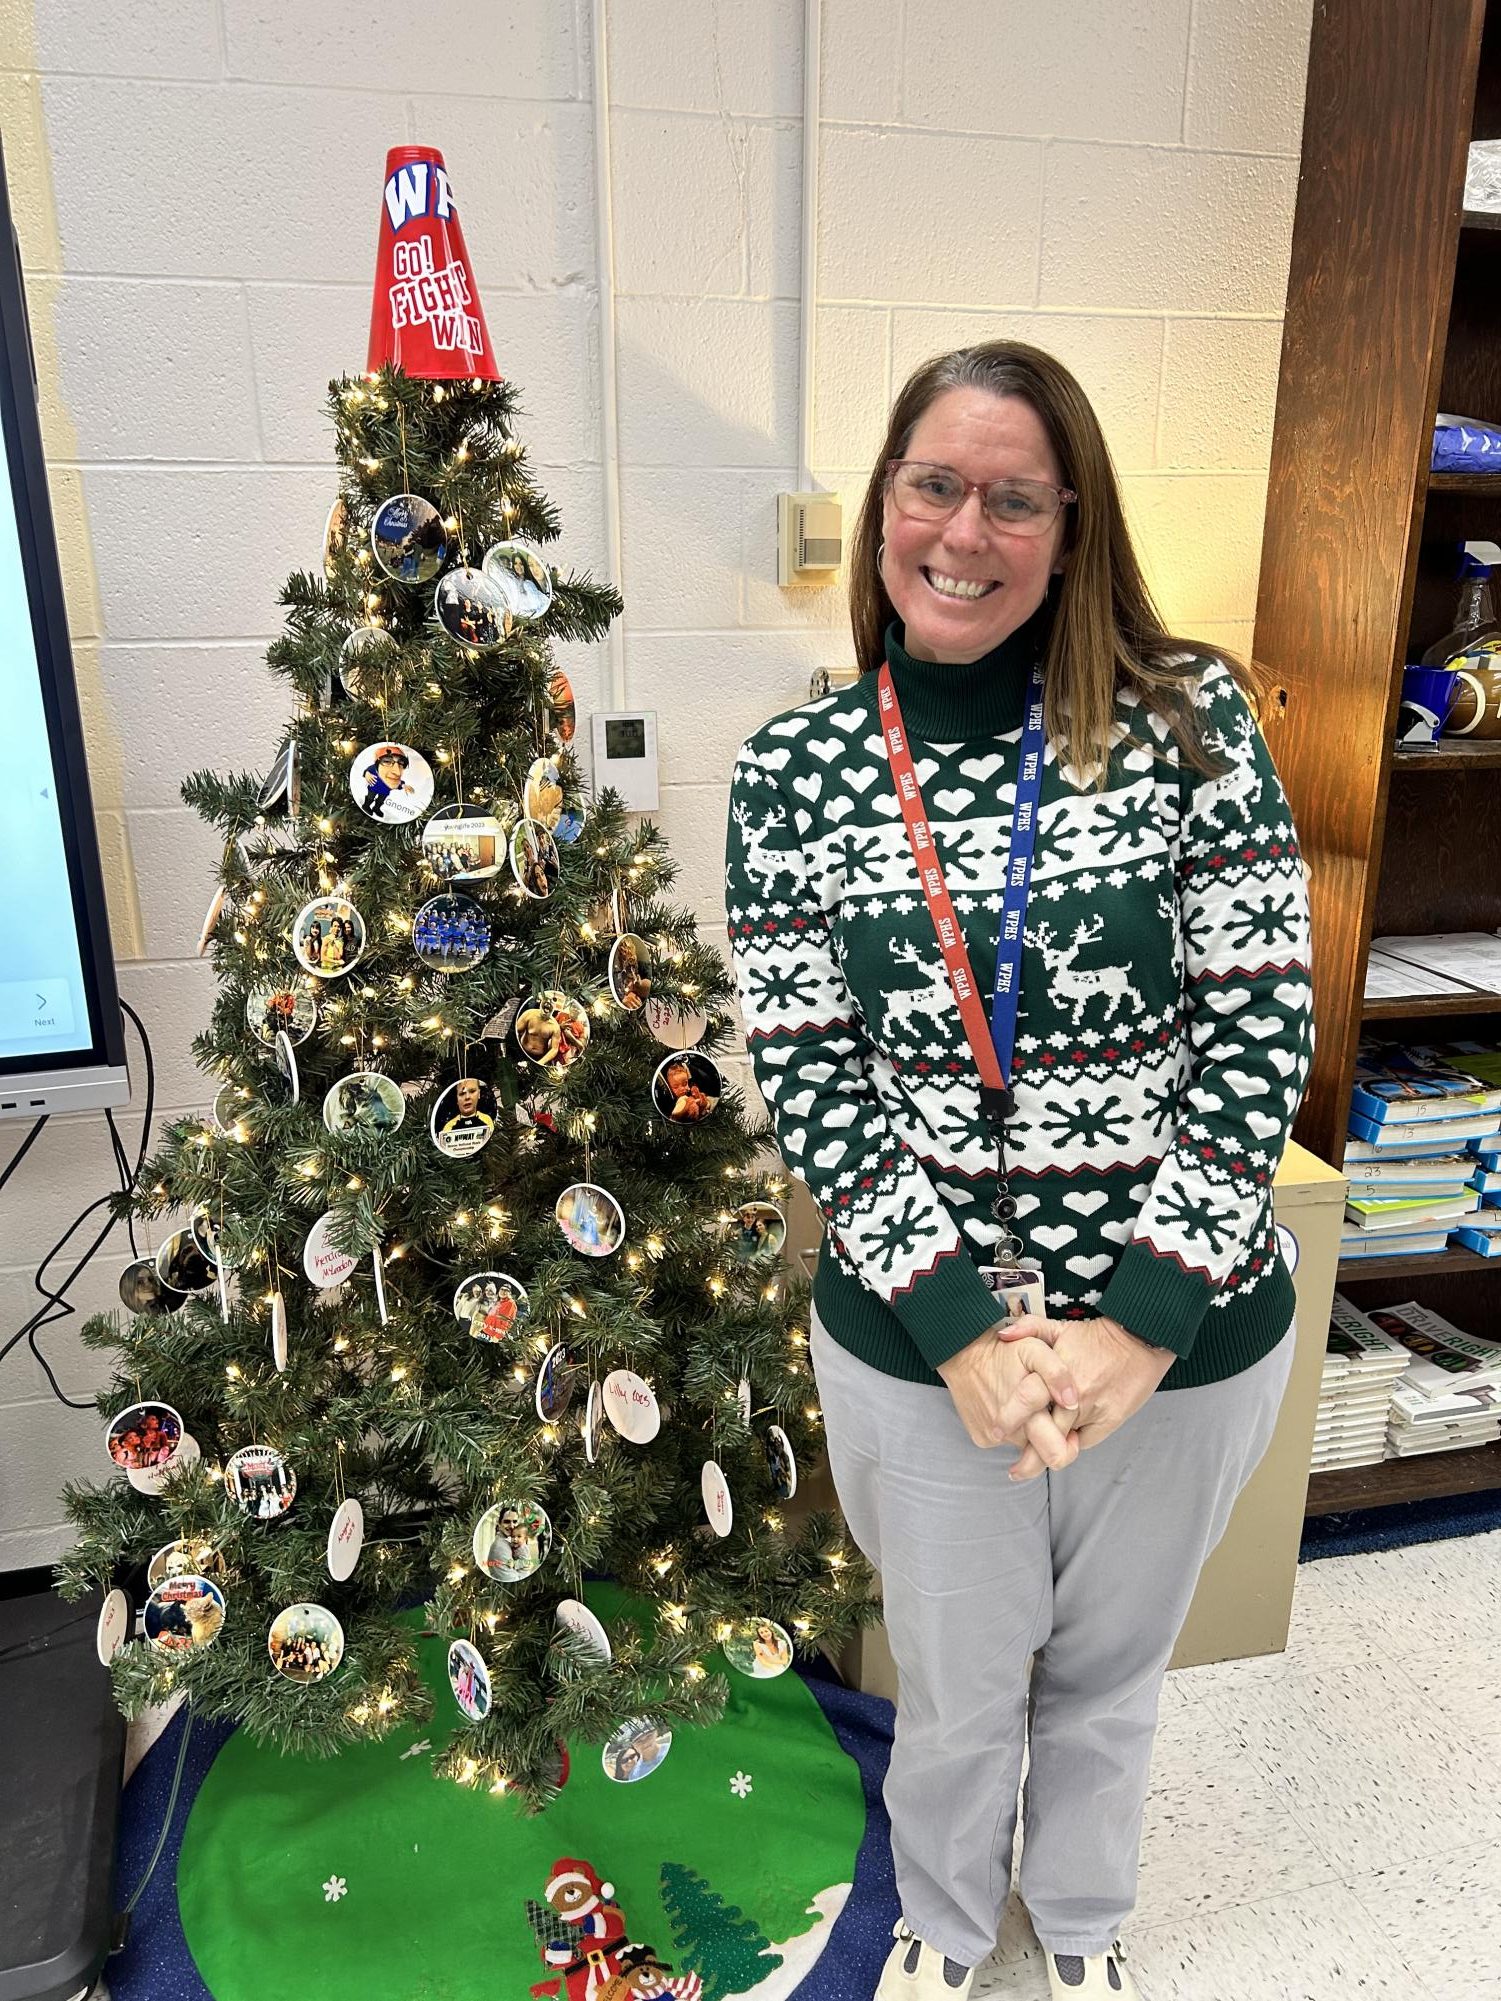 Mrs. Goodrich with her Christmas tree decorated with ornaments made by her students!